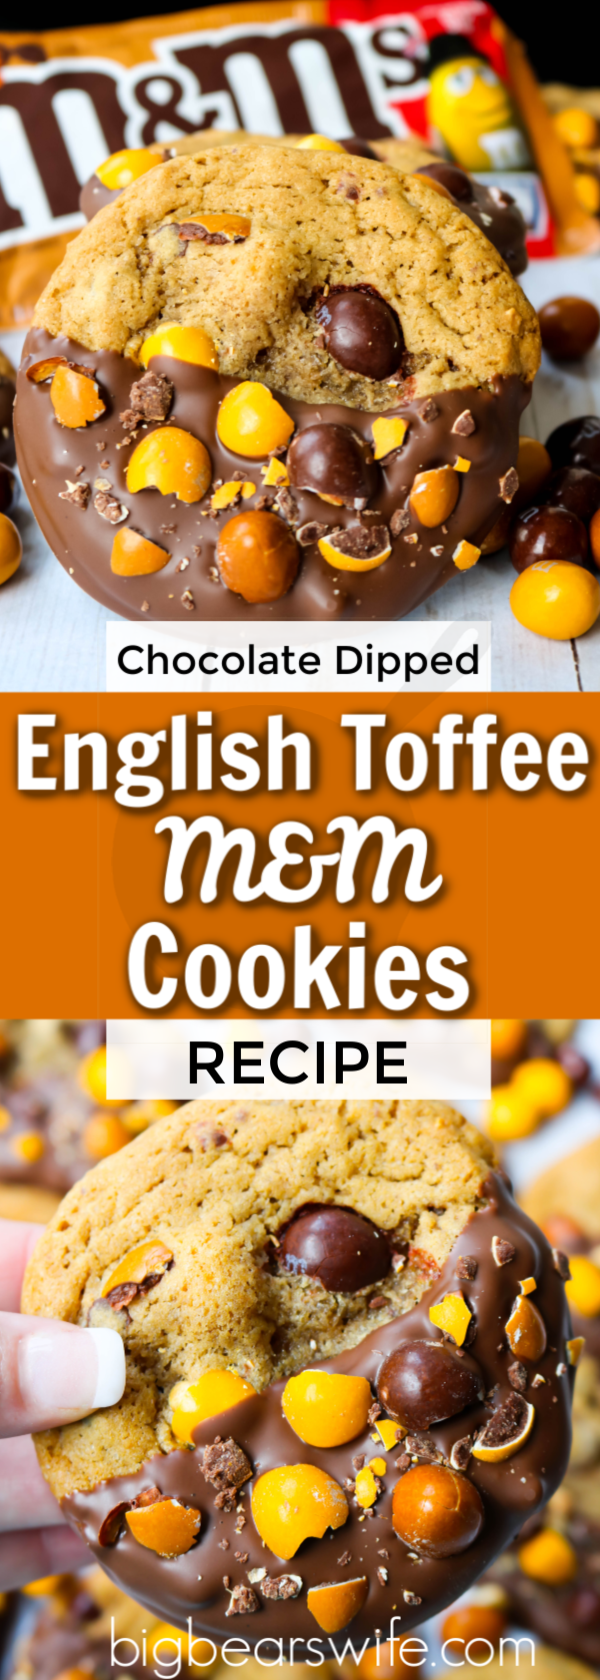 Chocolate Dipped English Toffee Peanut M&M Cookies - These homemade Chocolate Dipped English Toffee Peanut M&M Cookies are incredibly soft, packed with chocolate chips and feature the new English Toffee M&Ms! via @bigbearswife